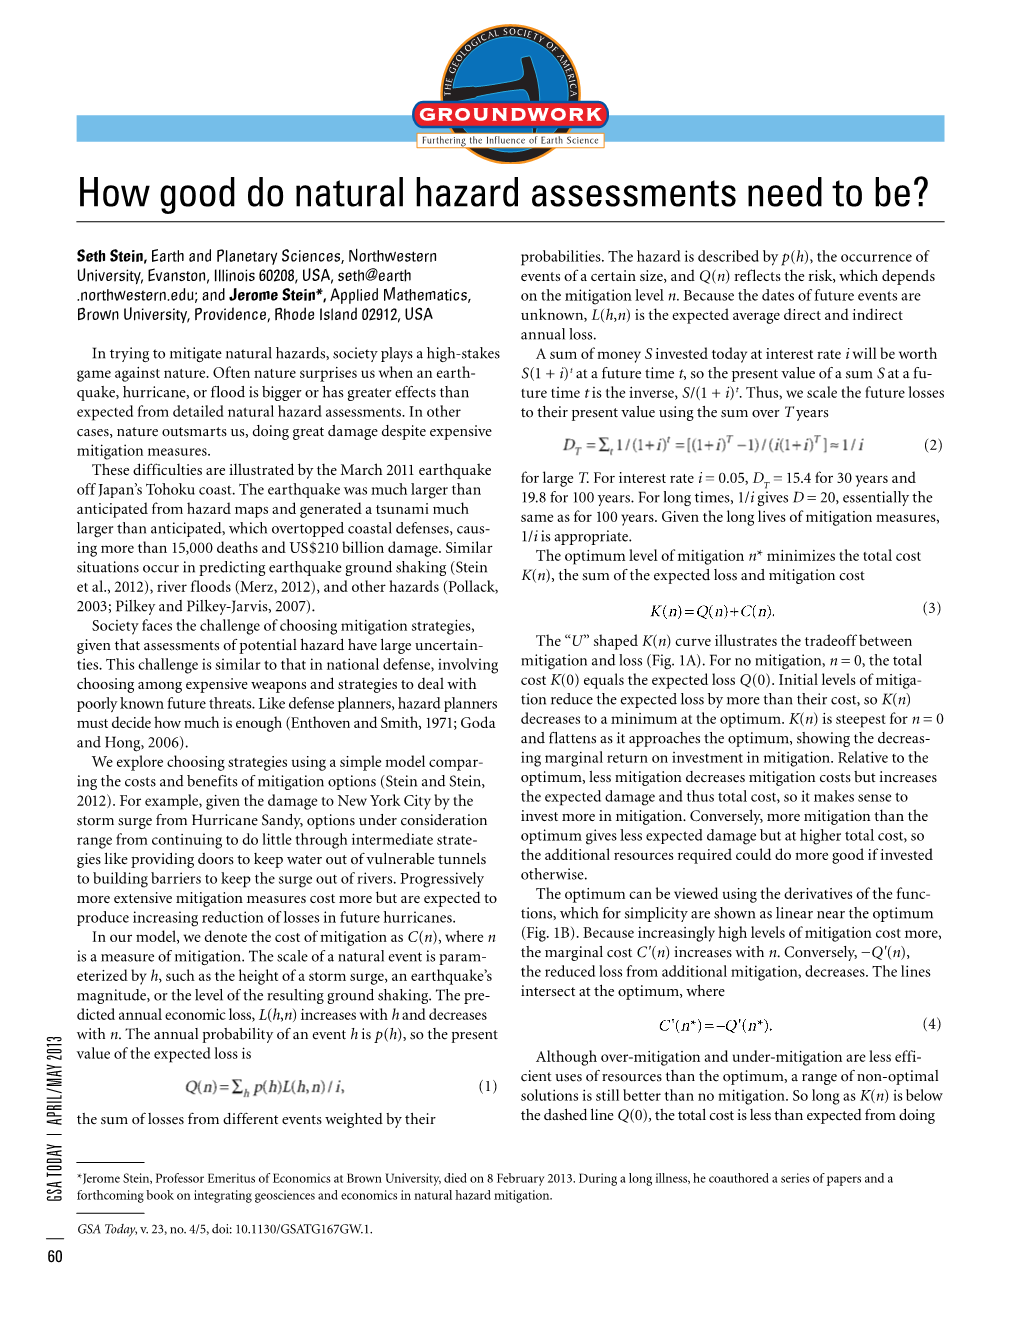 How Good Do Natural Hazard Assessments Need to Be?